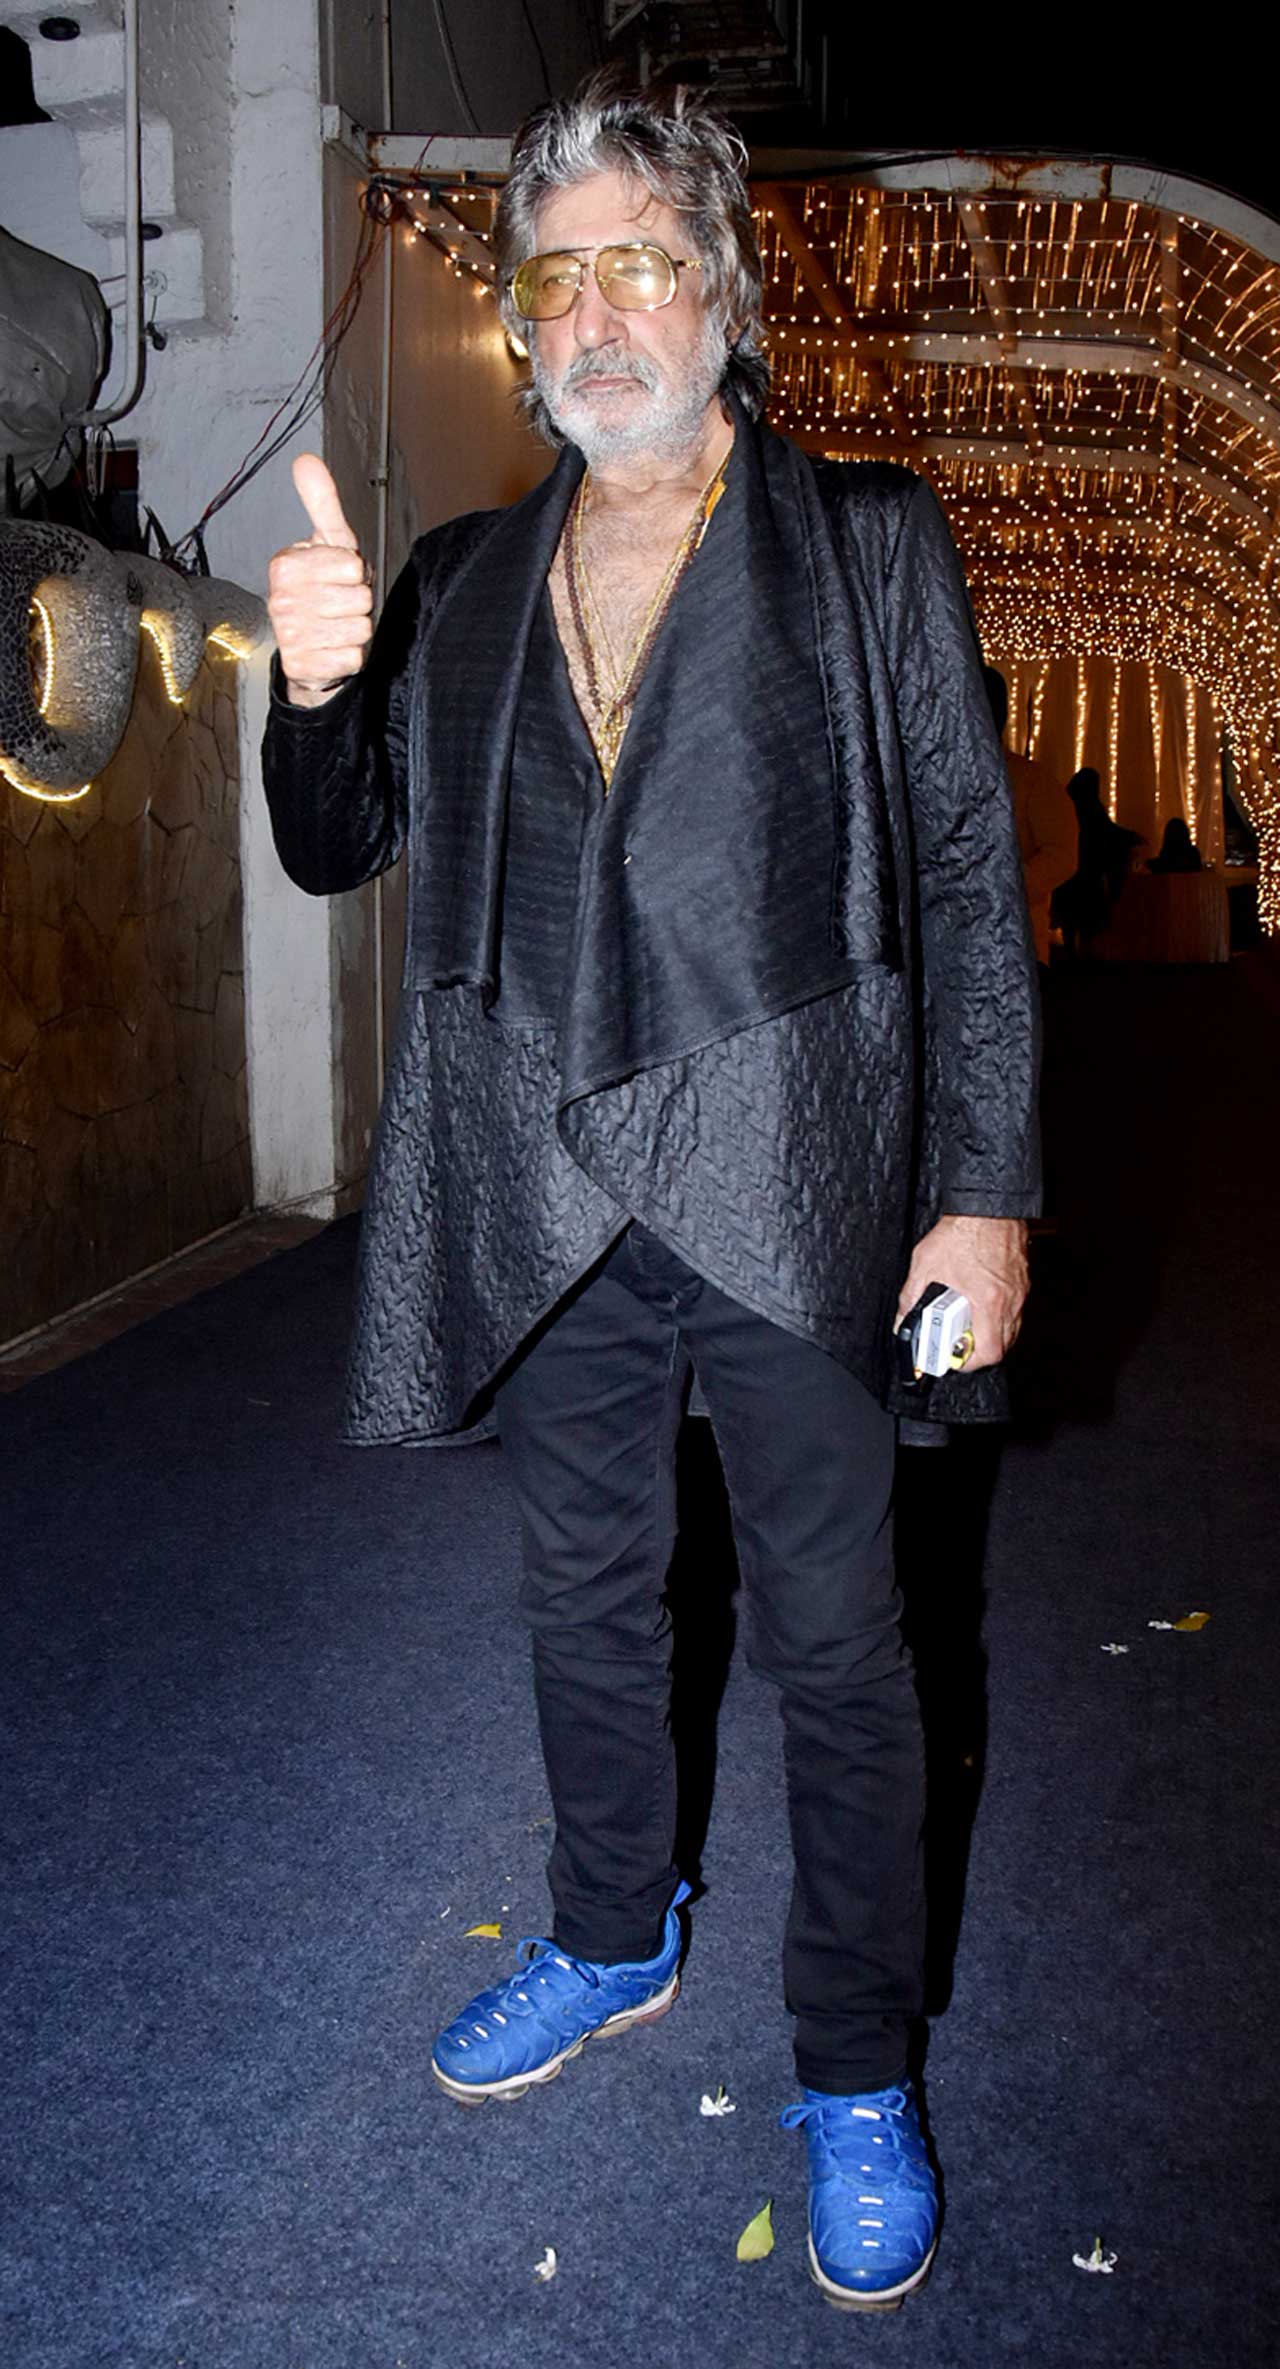 Shakti Kapoor gave the paparazzi a thumbs up as he attended the wedding ceremony hosted in Juhu, Mumbai. On the work front, Shakti was last seen in Malayalam film Lucifer.